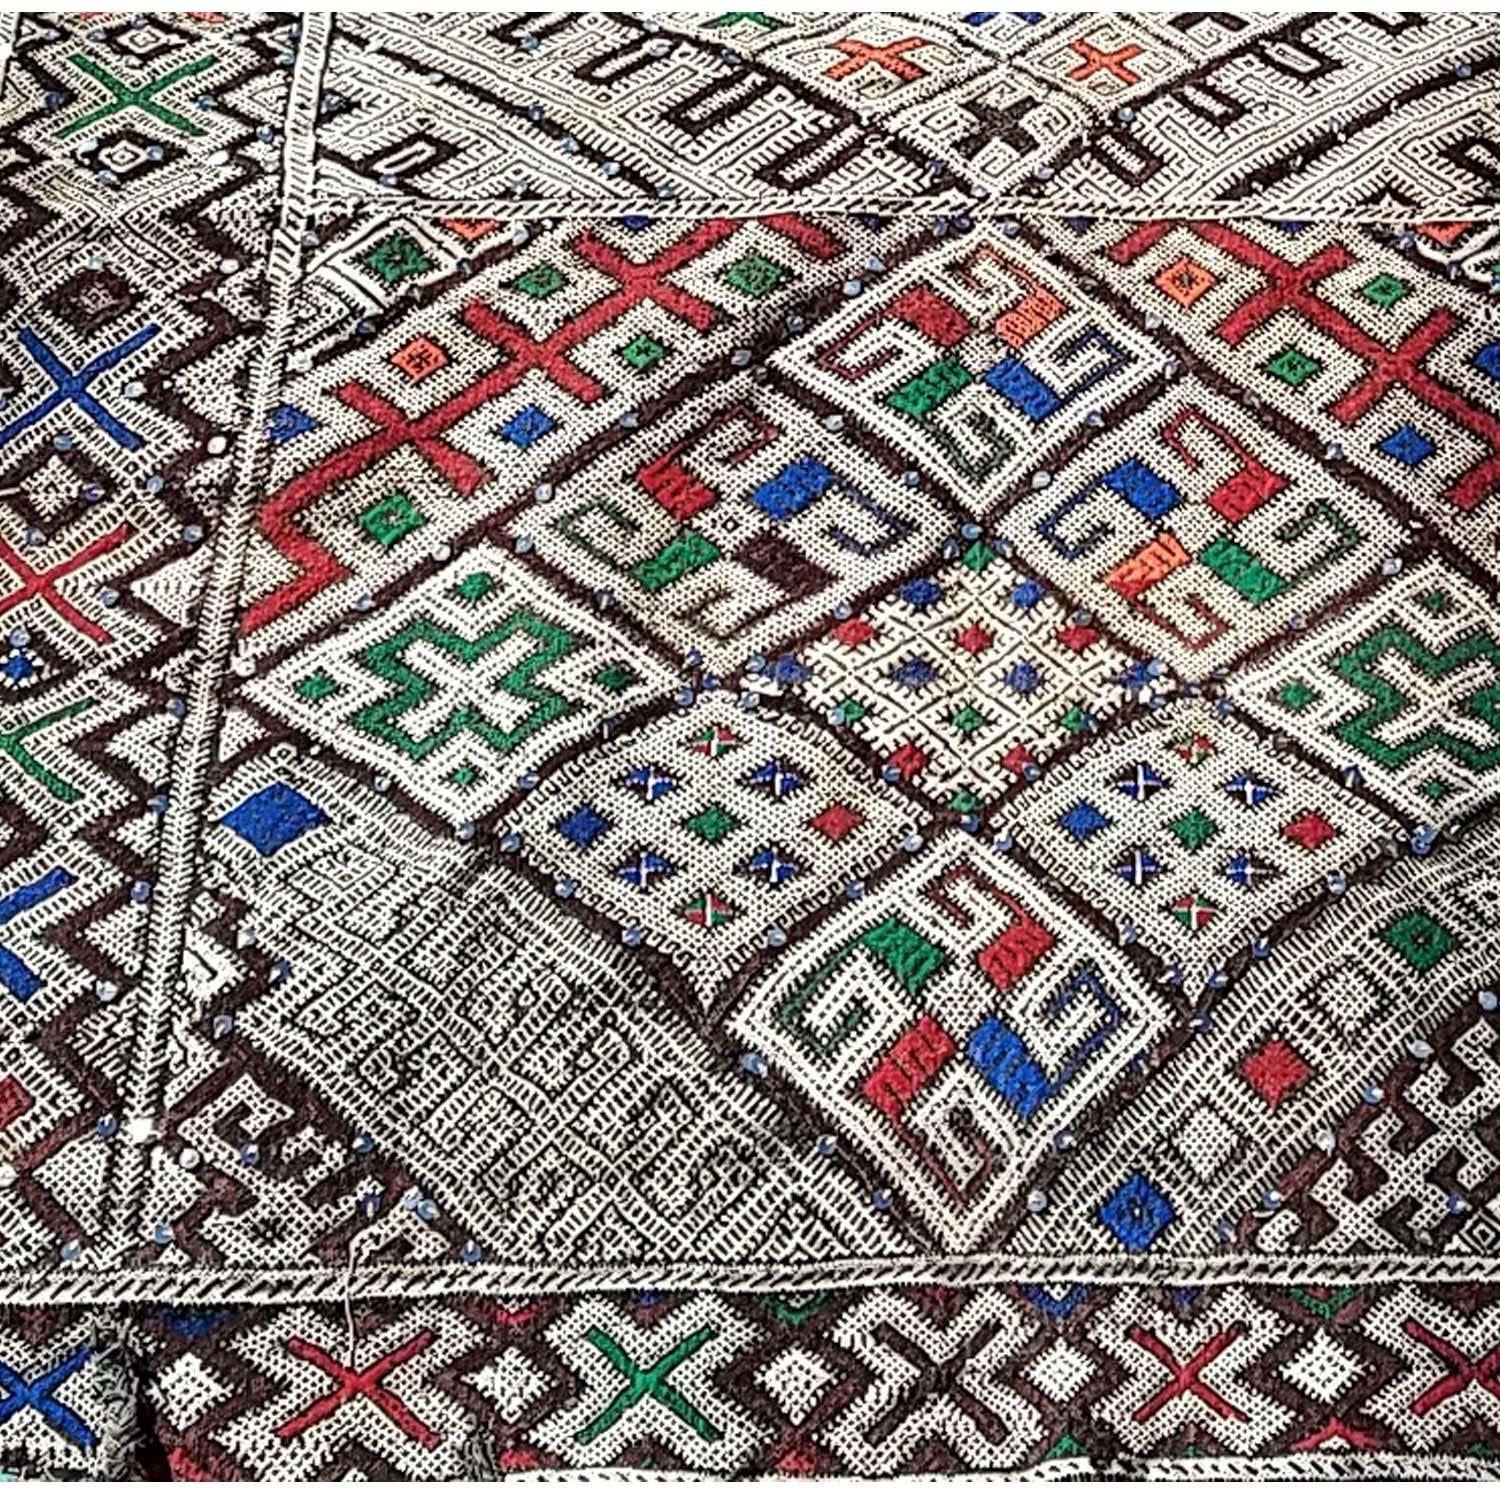 A rare Moroccan Berber carpet (or runner) measuring approximately 12' x 4'. Great for hallways, odd shape rooms or hanging on extra tall walls. Colors including blue, green, orange and burgundy. Sequins sewn in throughout. Please call us or email us